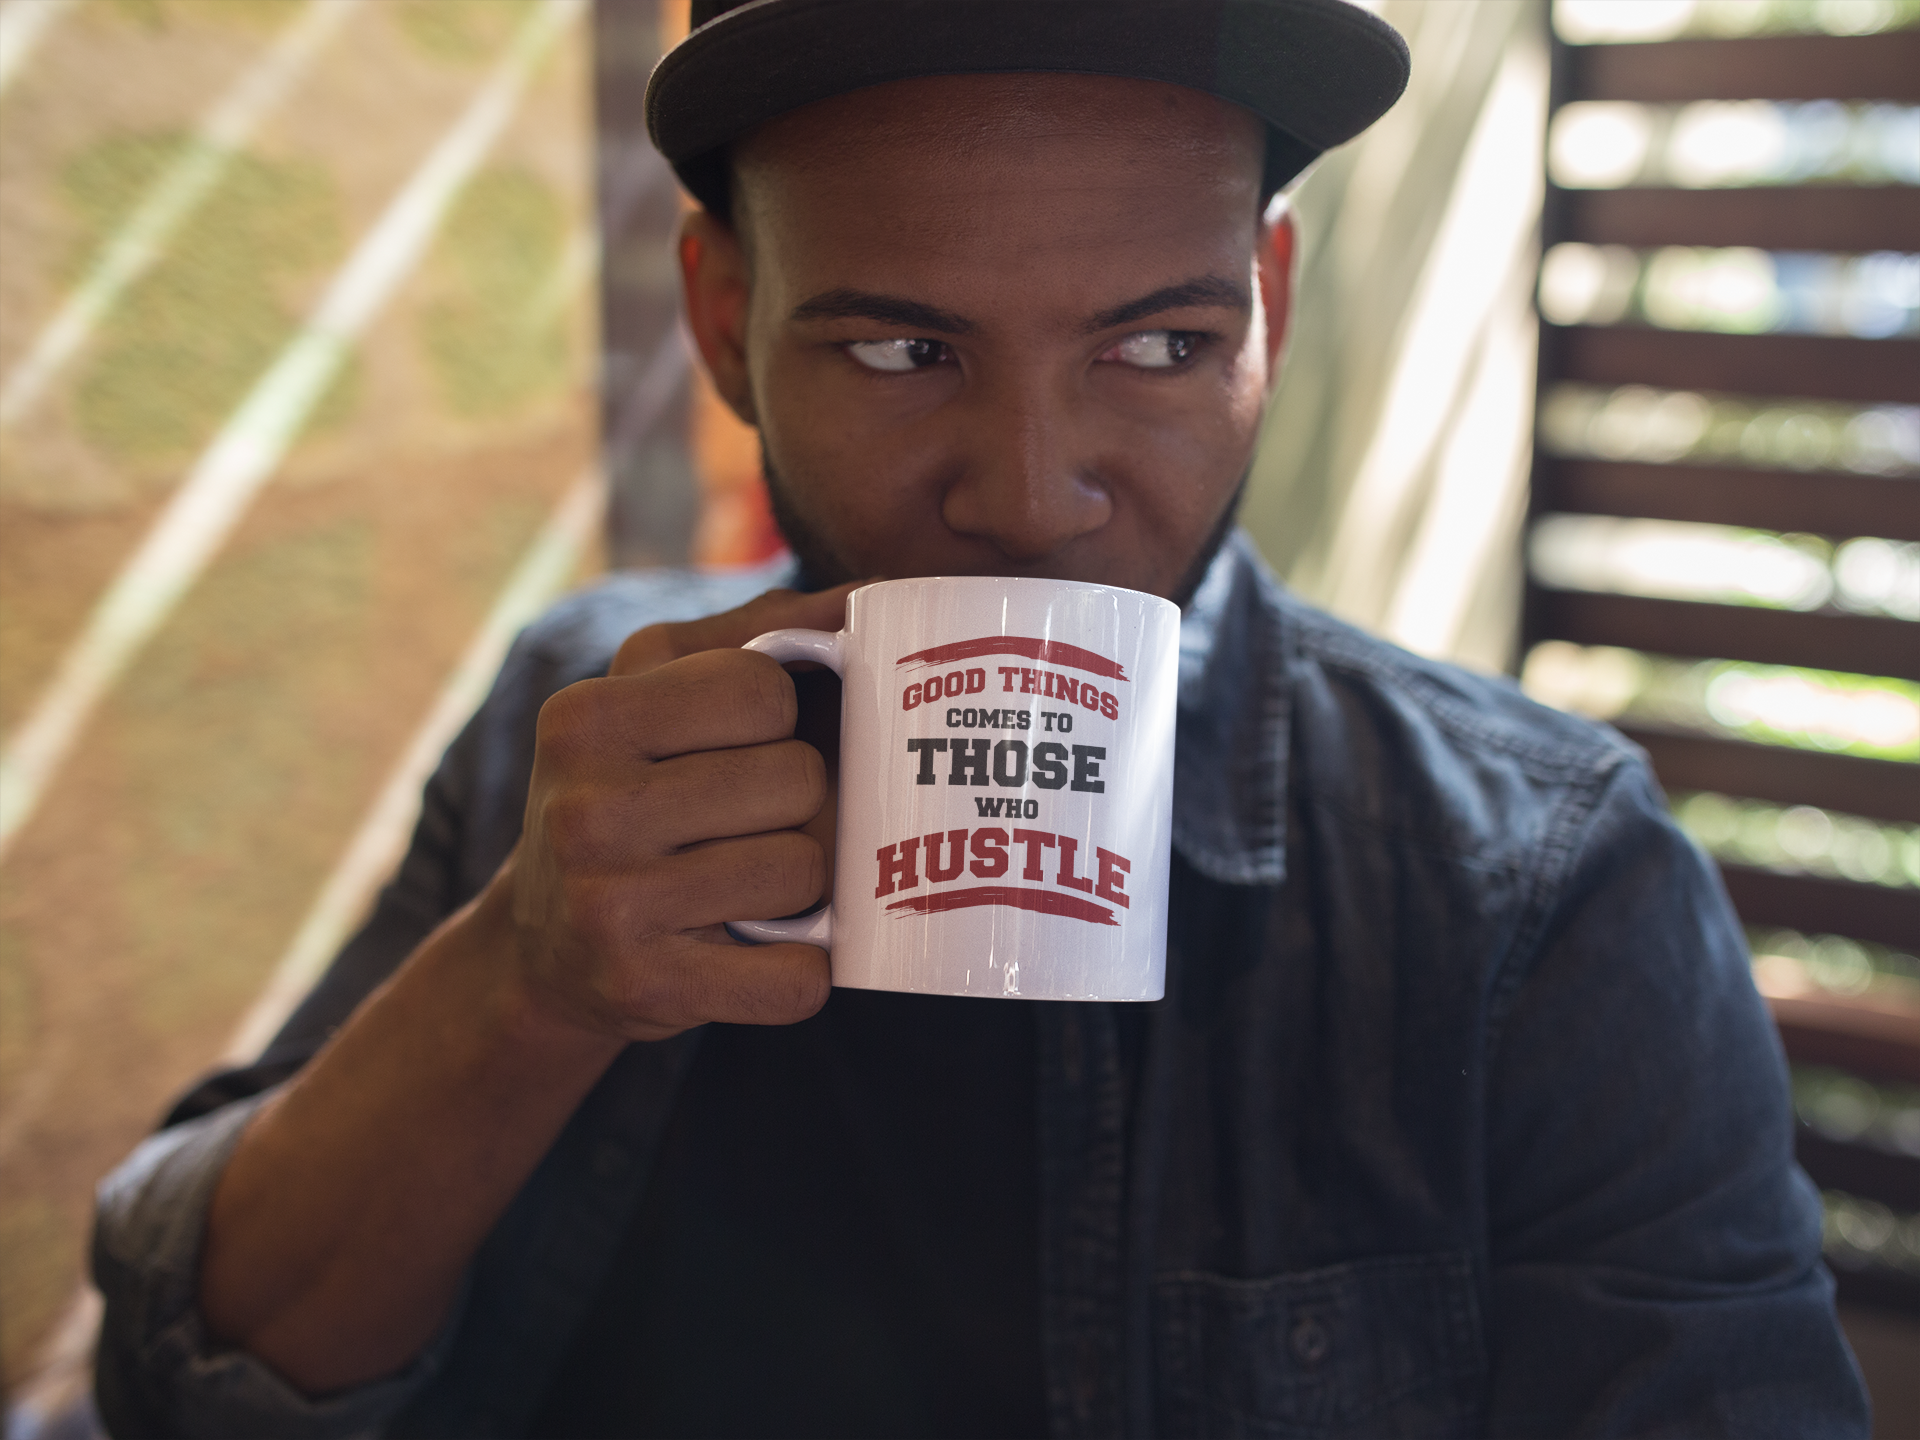 Good Things Come To Those Who Hustle Inspirational Quotes Coffee & Tea Gift Mug Cup For Business Coach, Speaker, Adviser, Influencer, Manager, Team Leader, And Founder (15oz) - image 2 of 3